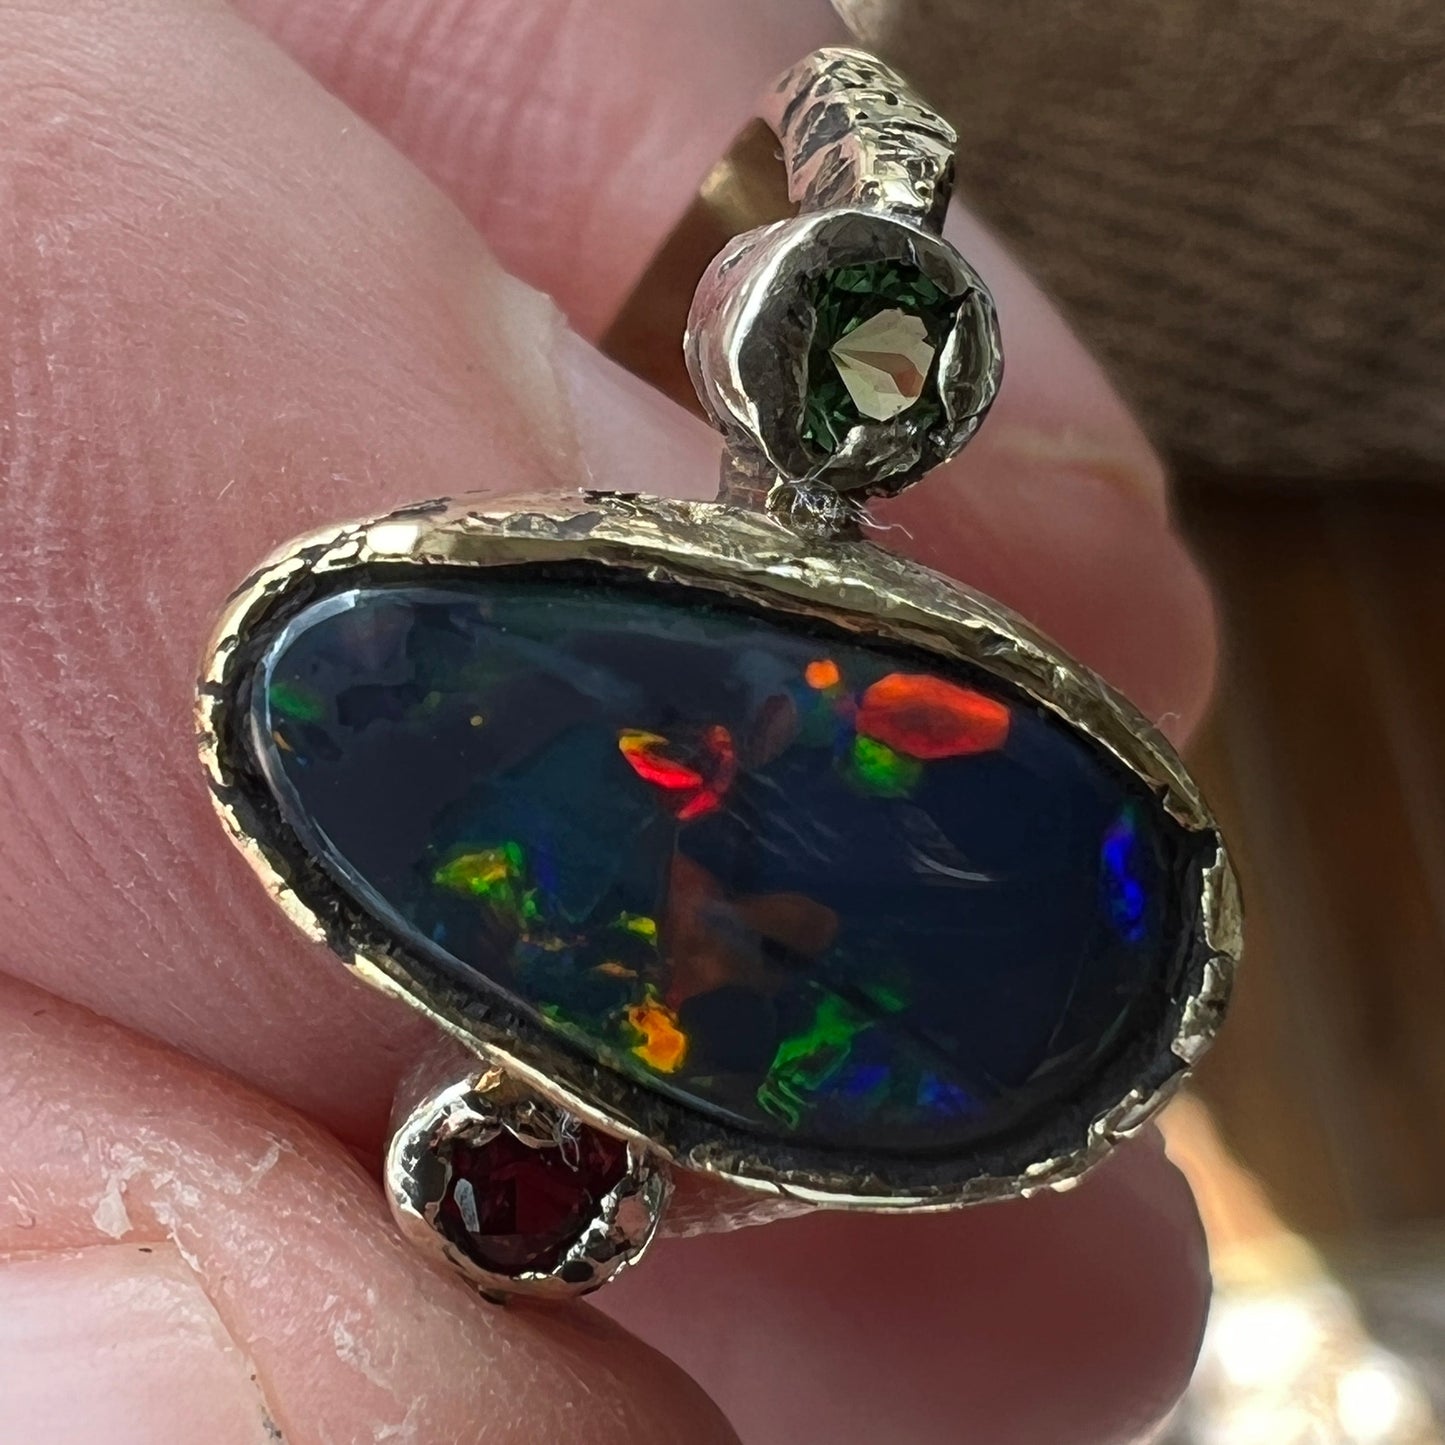 Perfect solid black opal from Lightning Ridge. Opal flanked with Burmese Spinel and Tsavorite. 18ct gold with 9ct gold mounts. Ring size N can be adjusted. This is as good as it gets for a Lightning Ridge black opal displaying all the colours. Magnificent.